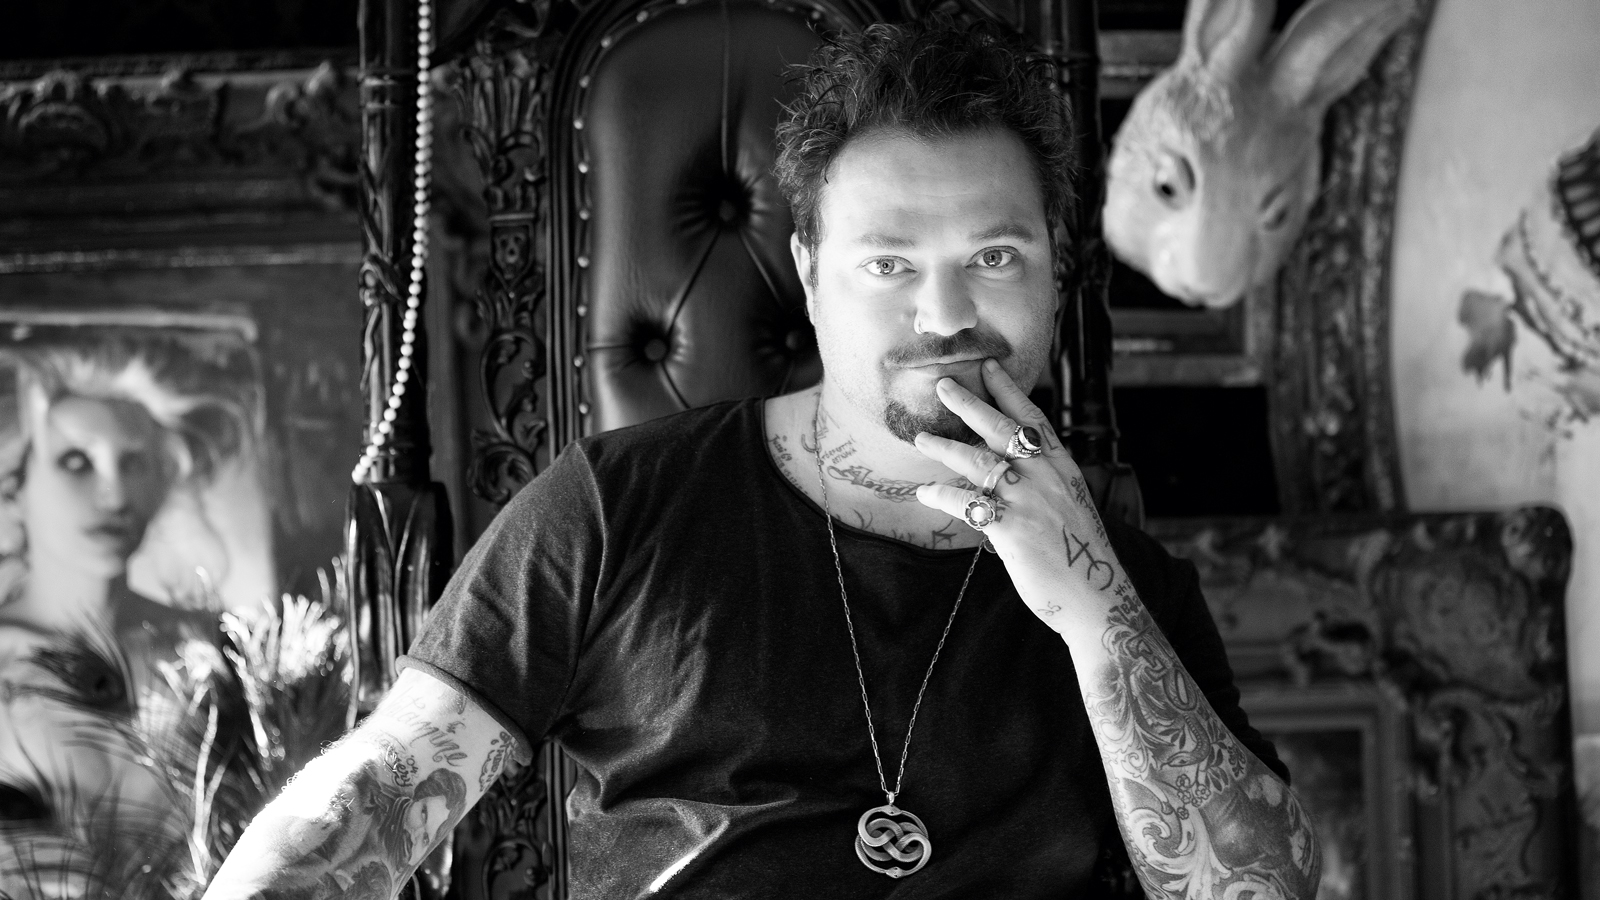 Bam Margera on Naked Stalkers, Bad Tattoos, Finding Sobriety After Jackass Revolver photo